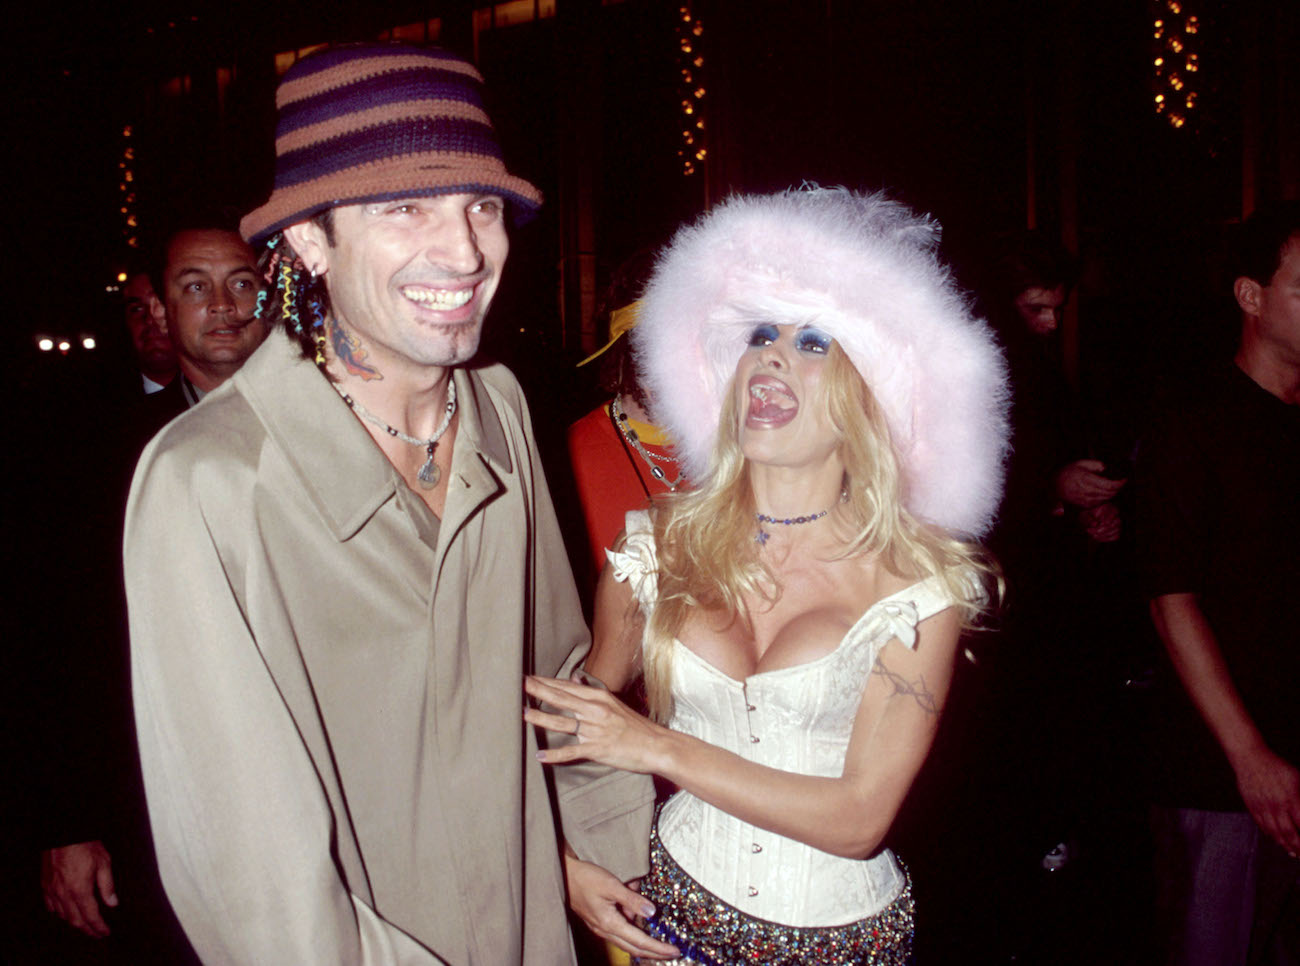 Tommy Lee and Pamela Anderson at the 1999 MTV VMAs.